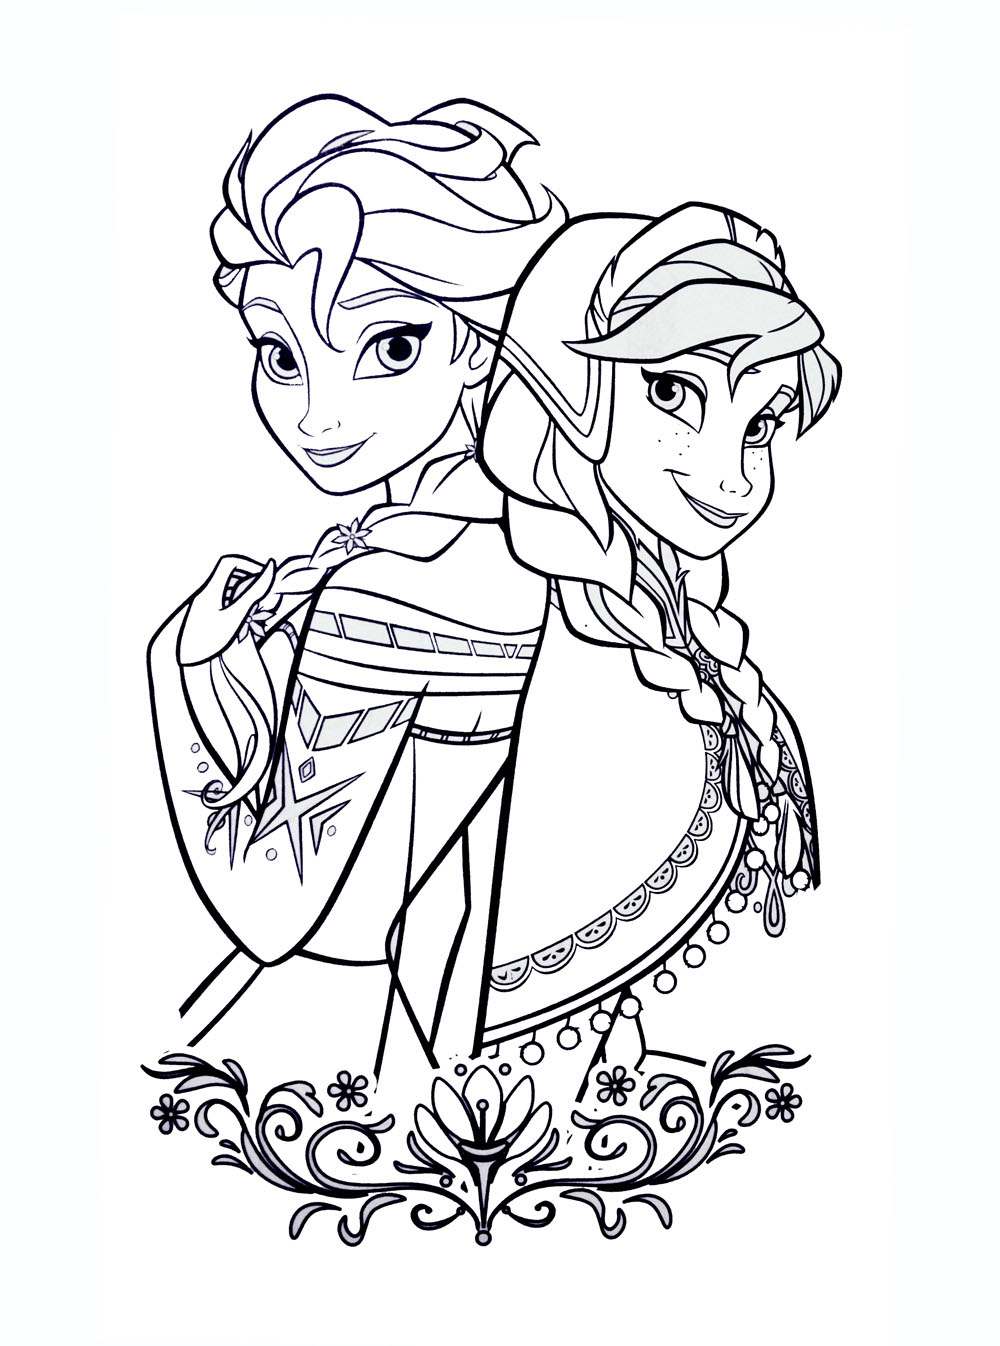 Frozen Anna and Elsa Coloring Page